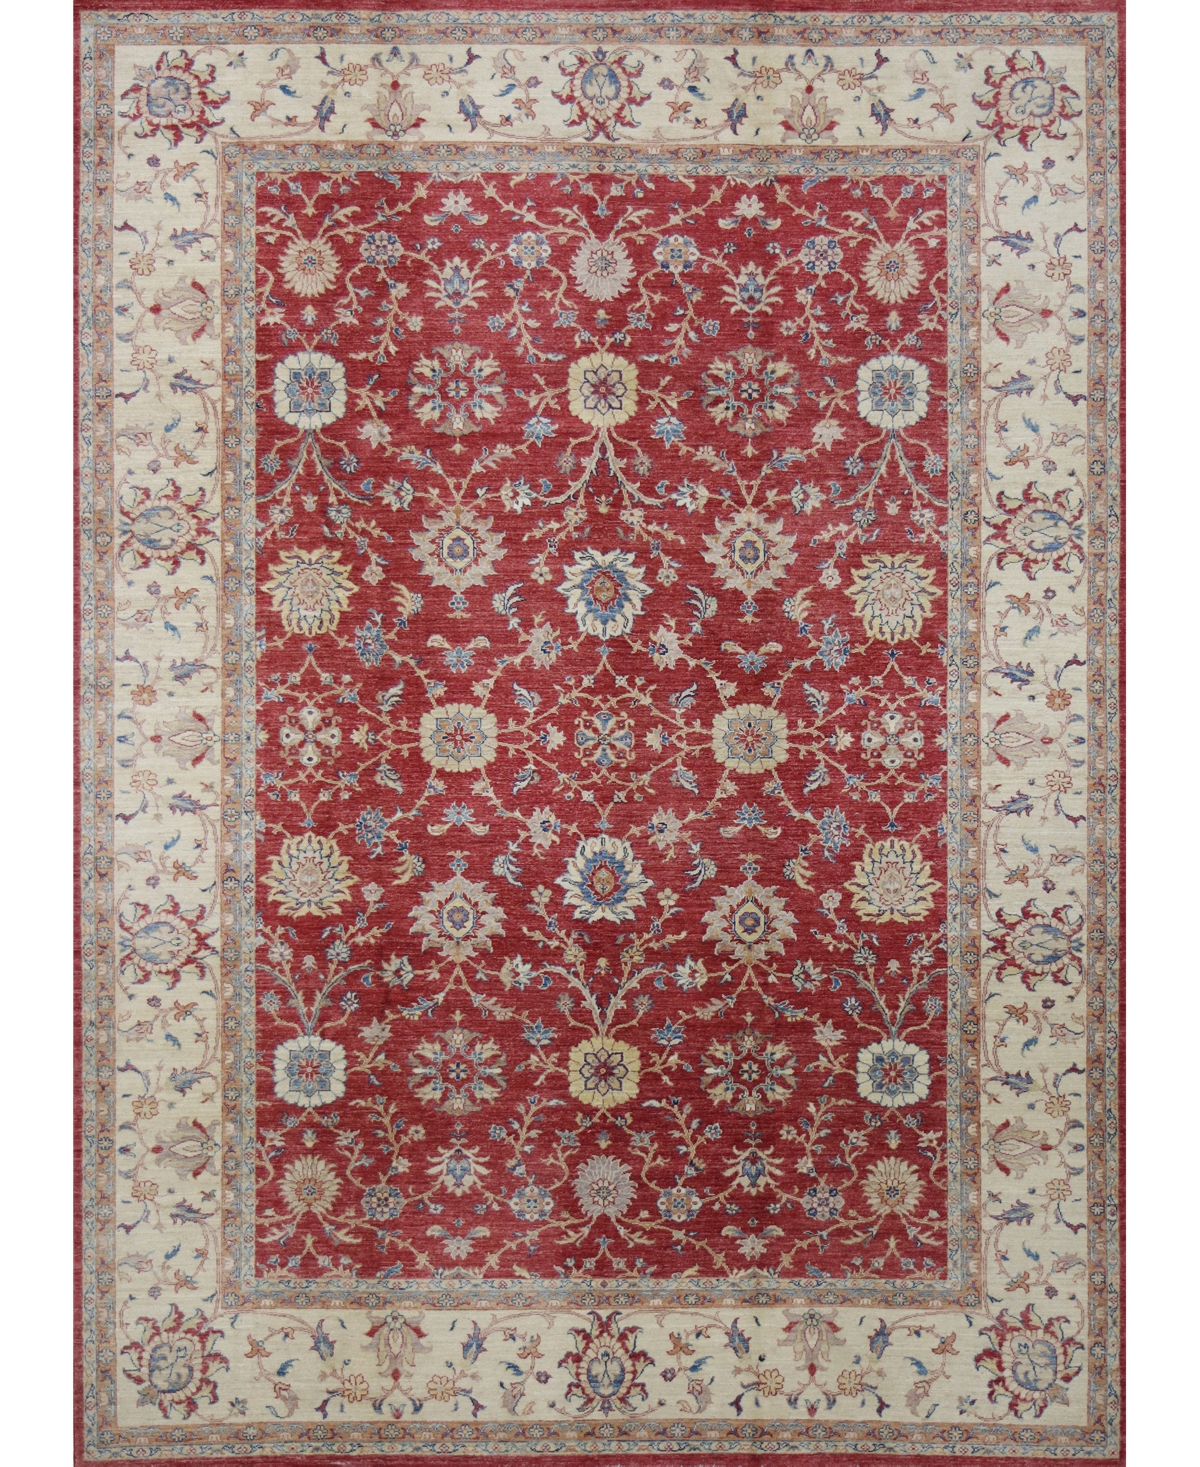 Bb Rugs One Of A Kind Mansehra 8'3" X 11'7" Area Rug In Red